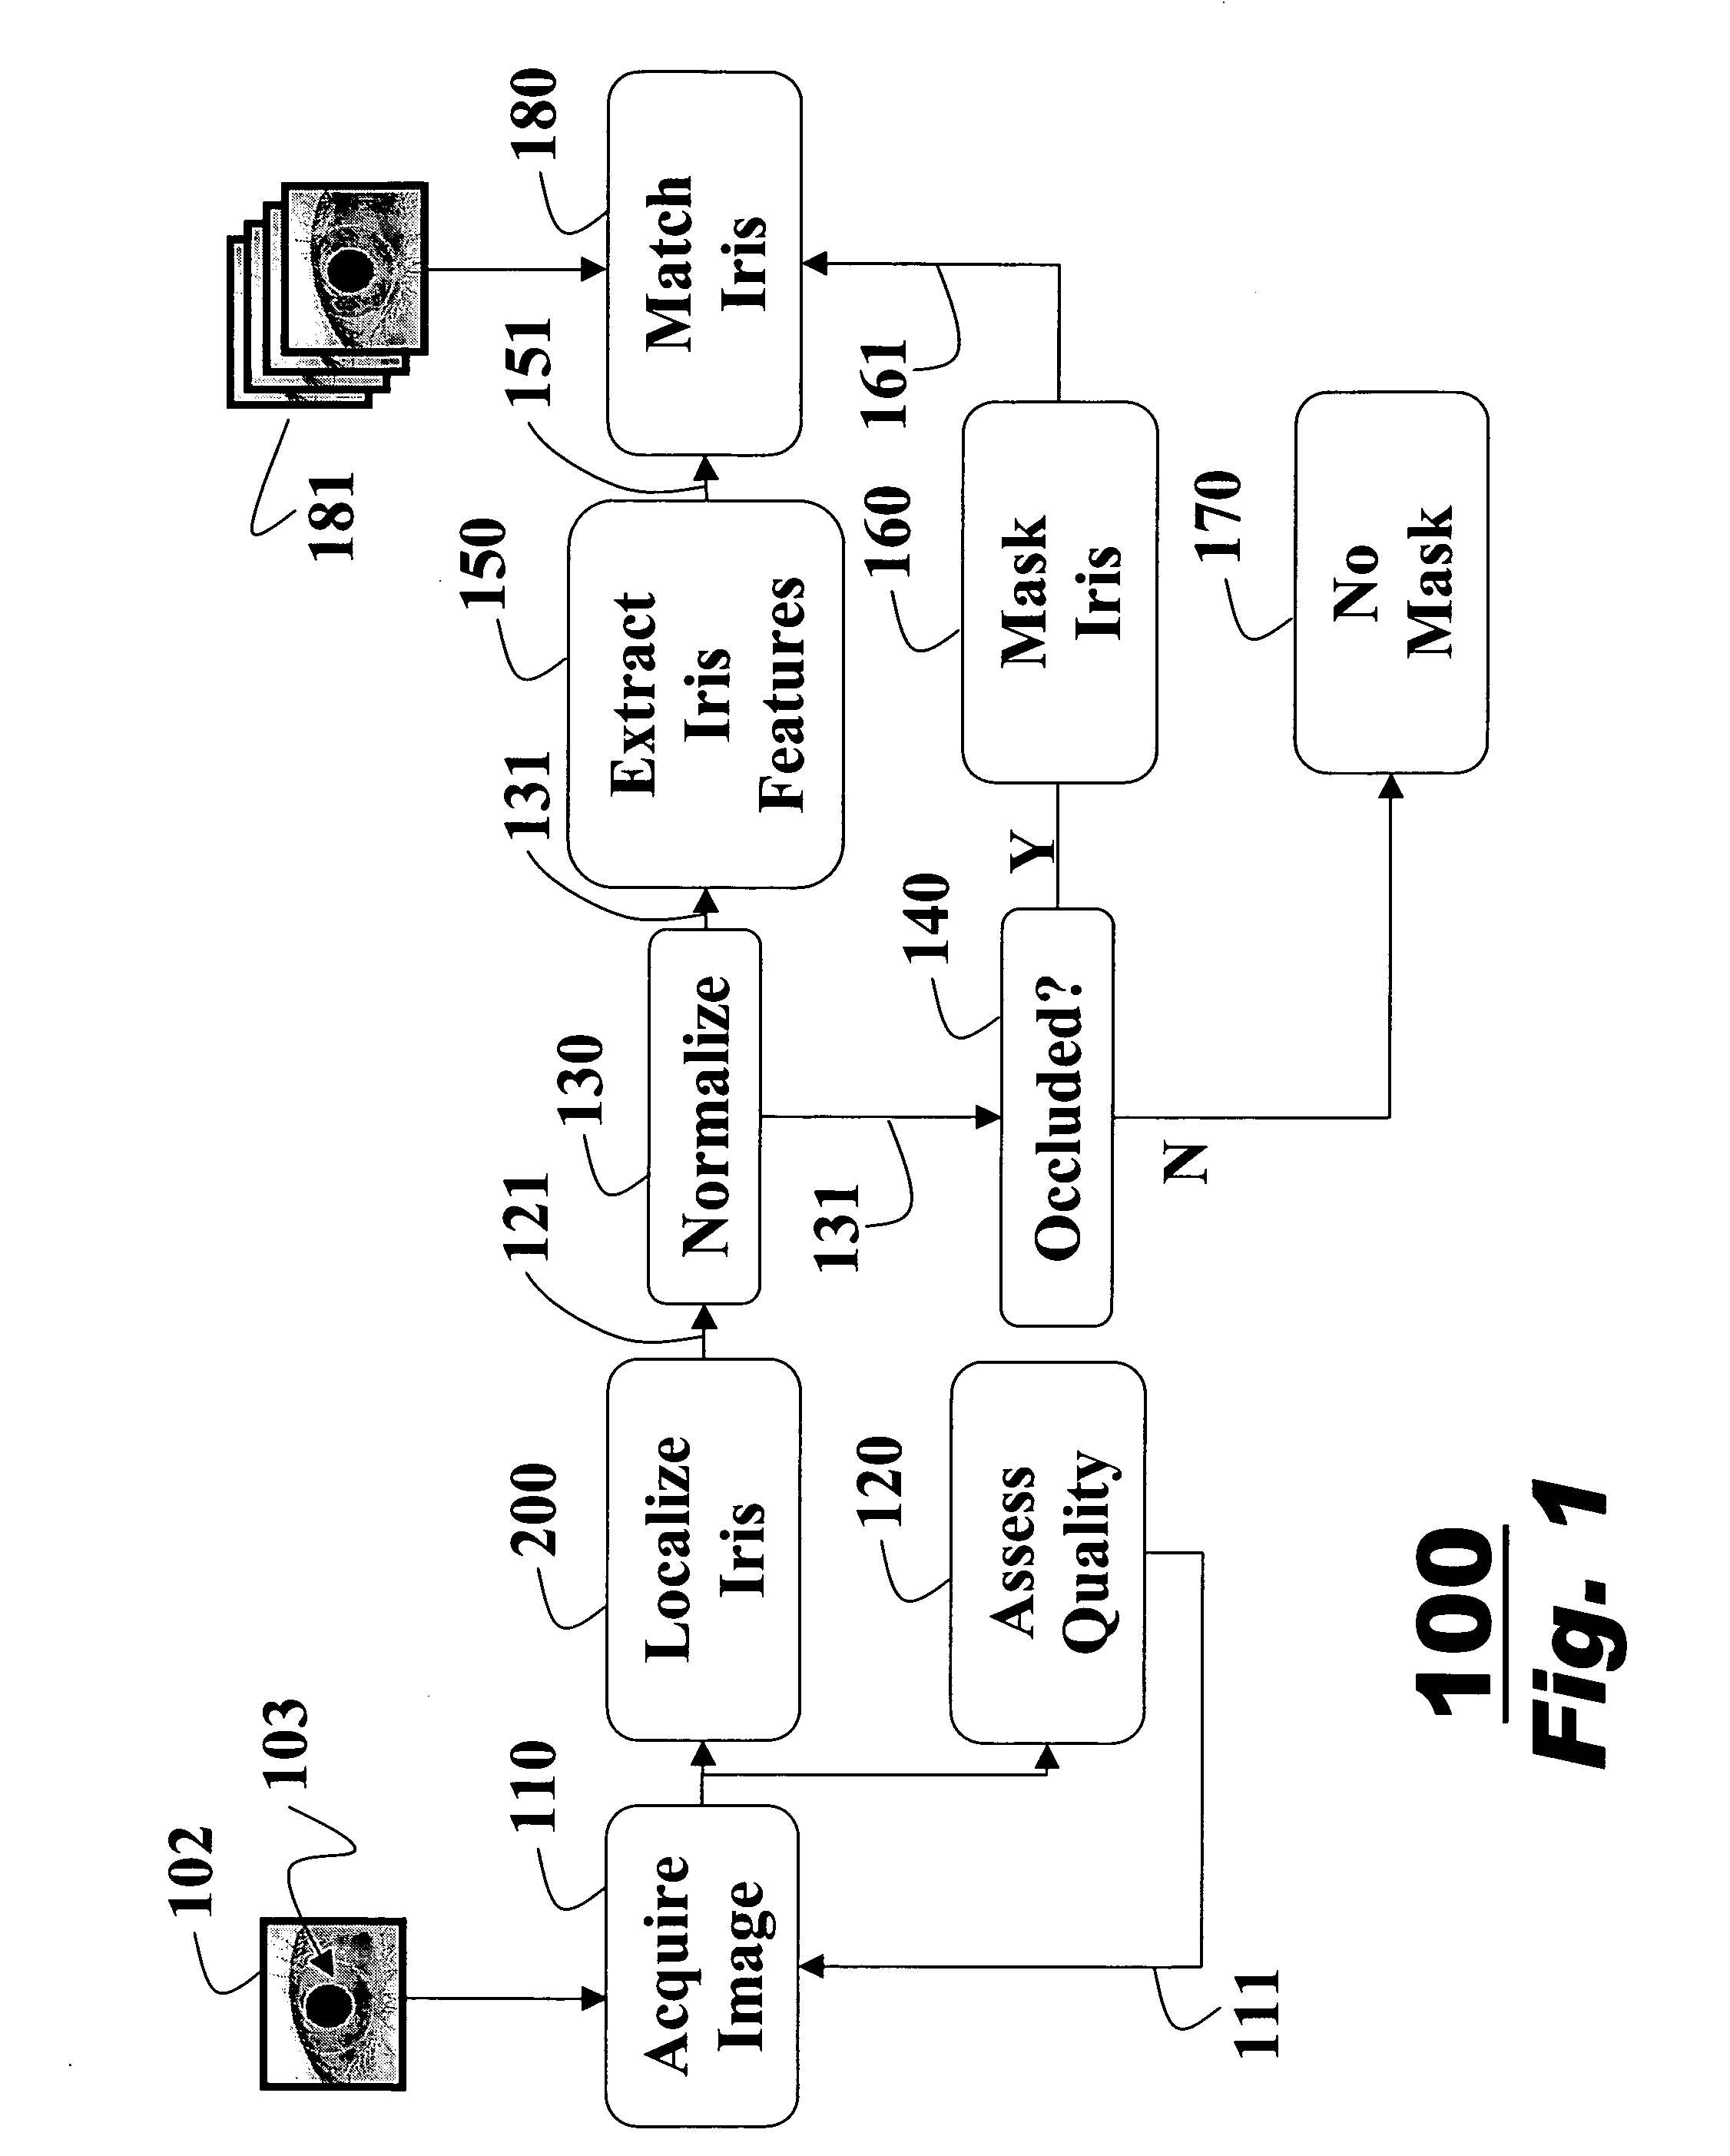 Method for extracting features of irises in images using difference of sum filters